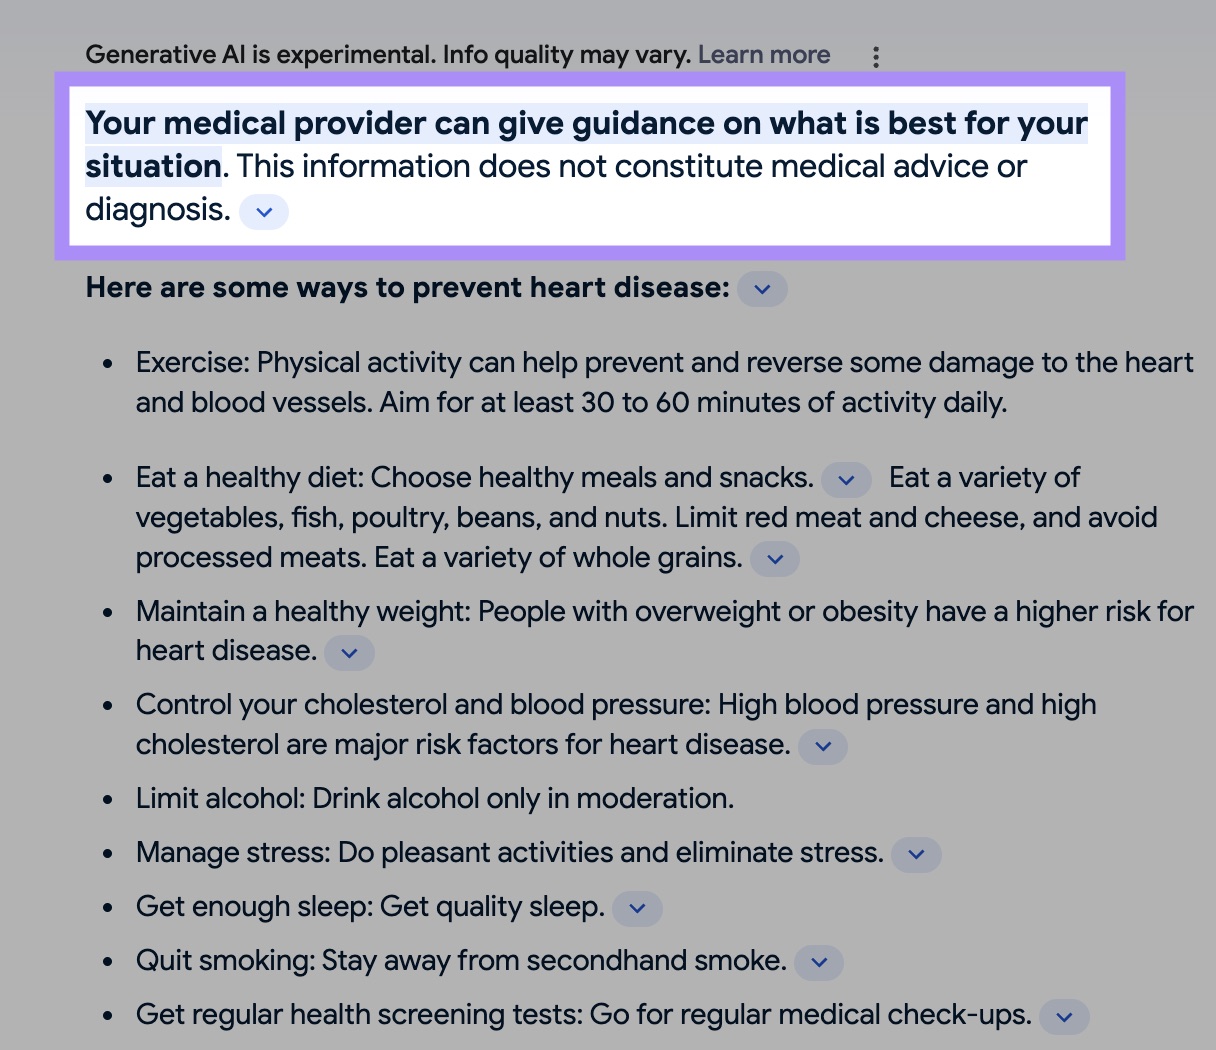 Google SGE disclaimer that reads "Your medical provider can give guidance on what if best for your situation. This information does not constitute medical advice or diagnosis.”